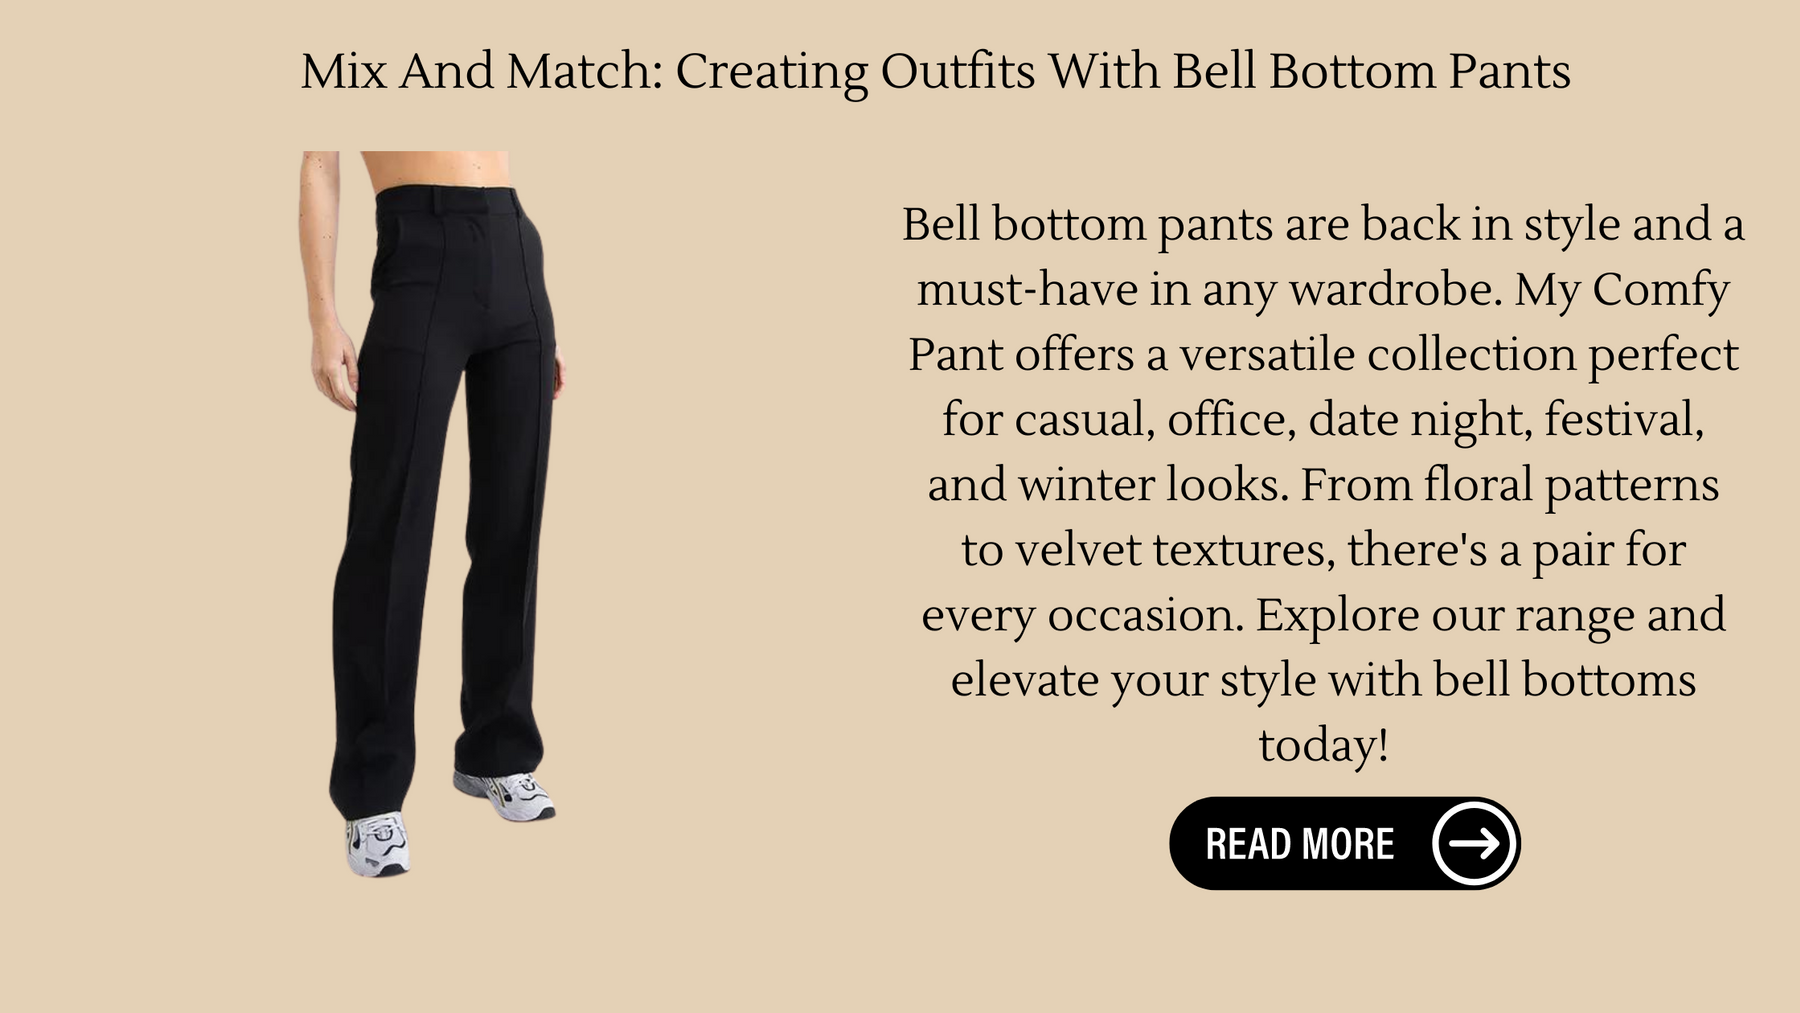 Mix And Match: Creating Outfits With Bell Bottom Pants